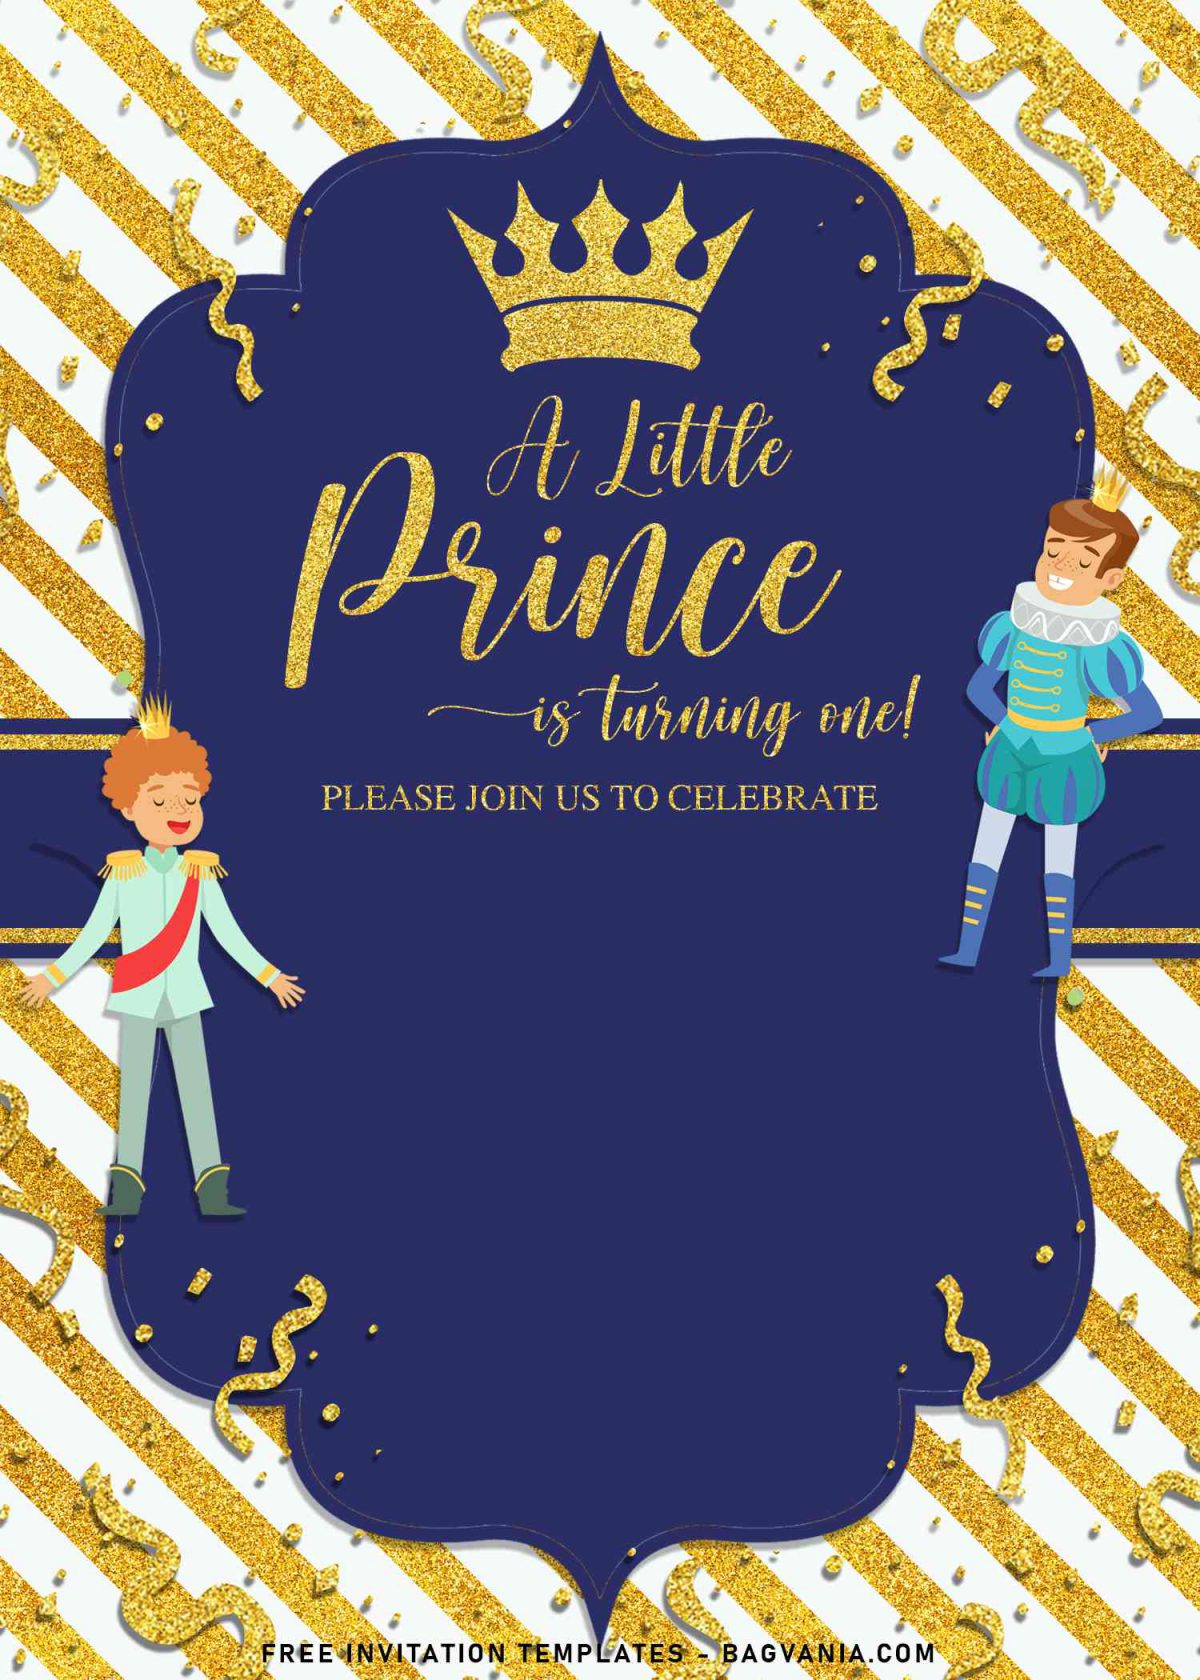 10+ Sparkling Gold Glitter Prince Birthday Invitation Templates and has Gold Glitter Prince crown